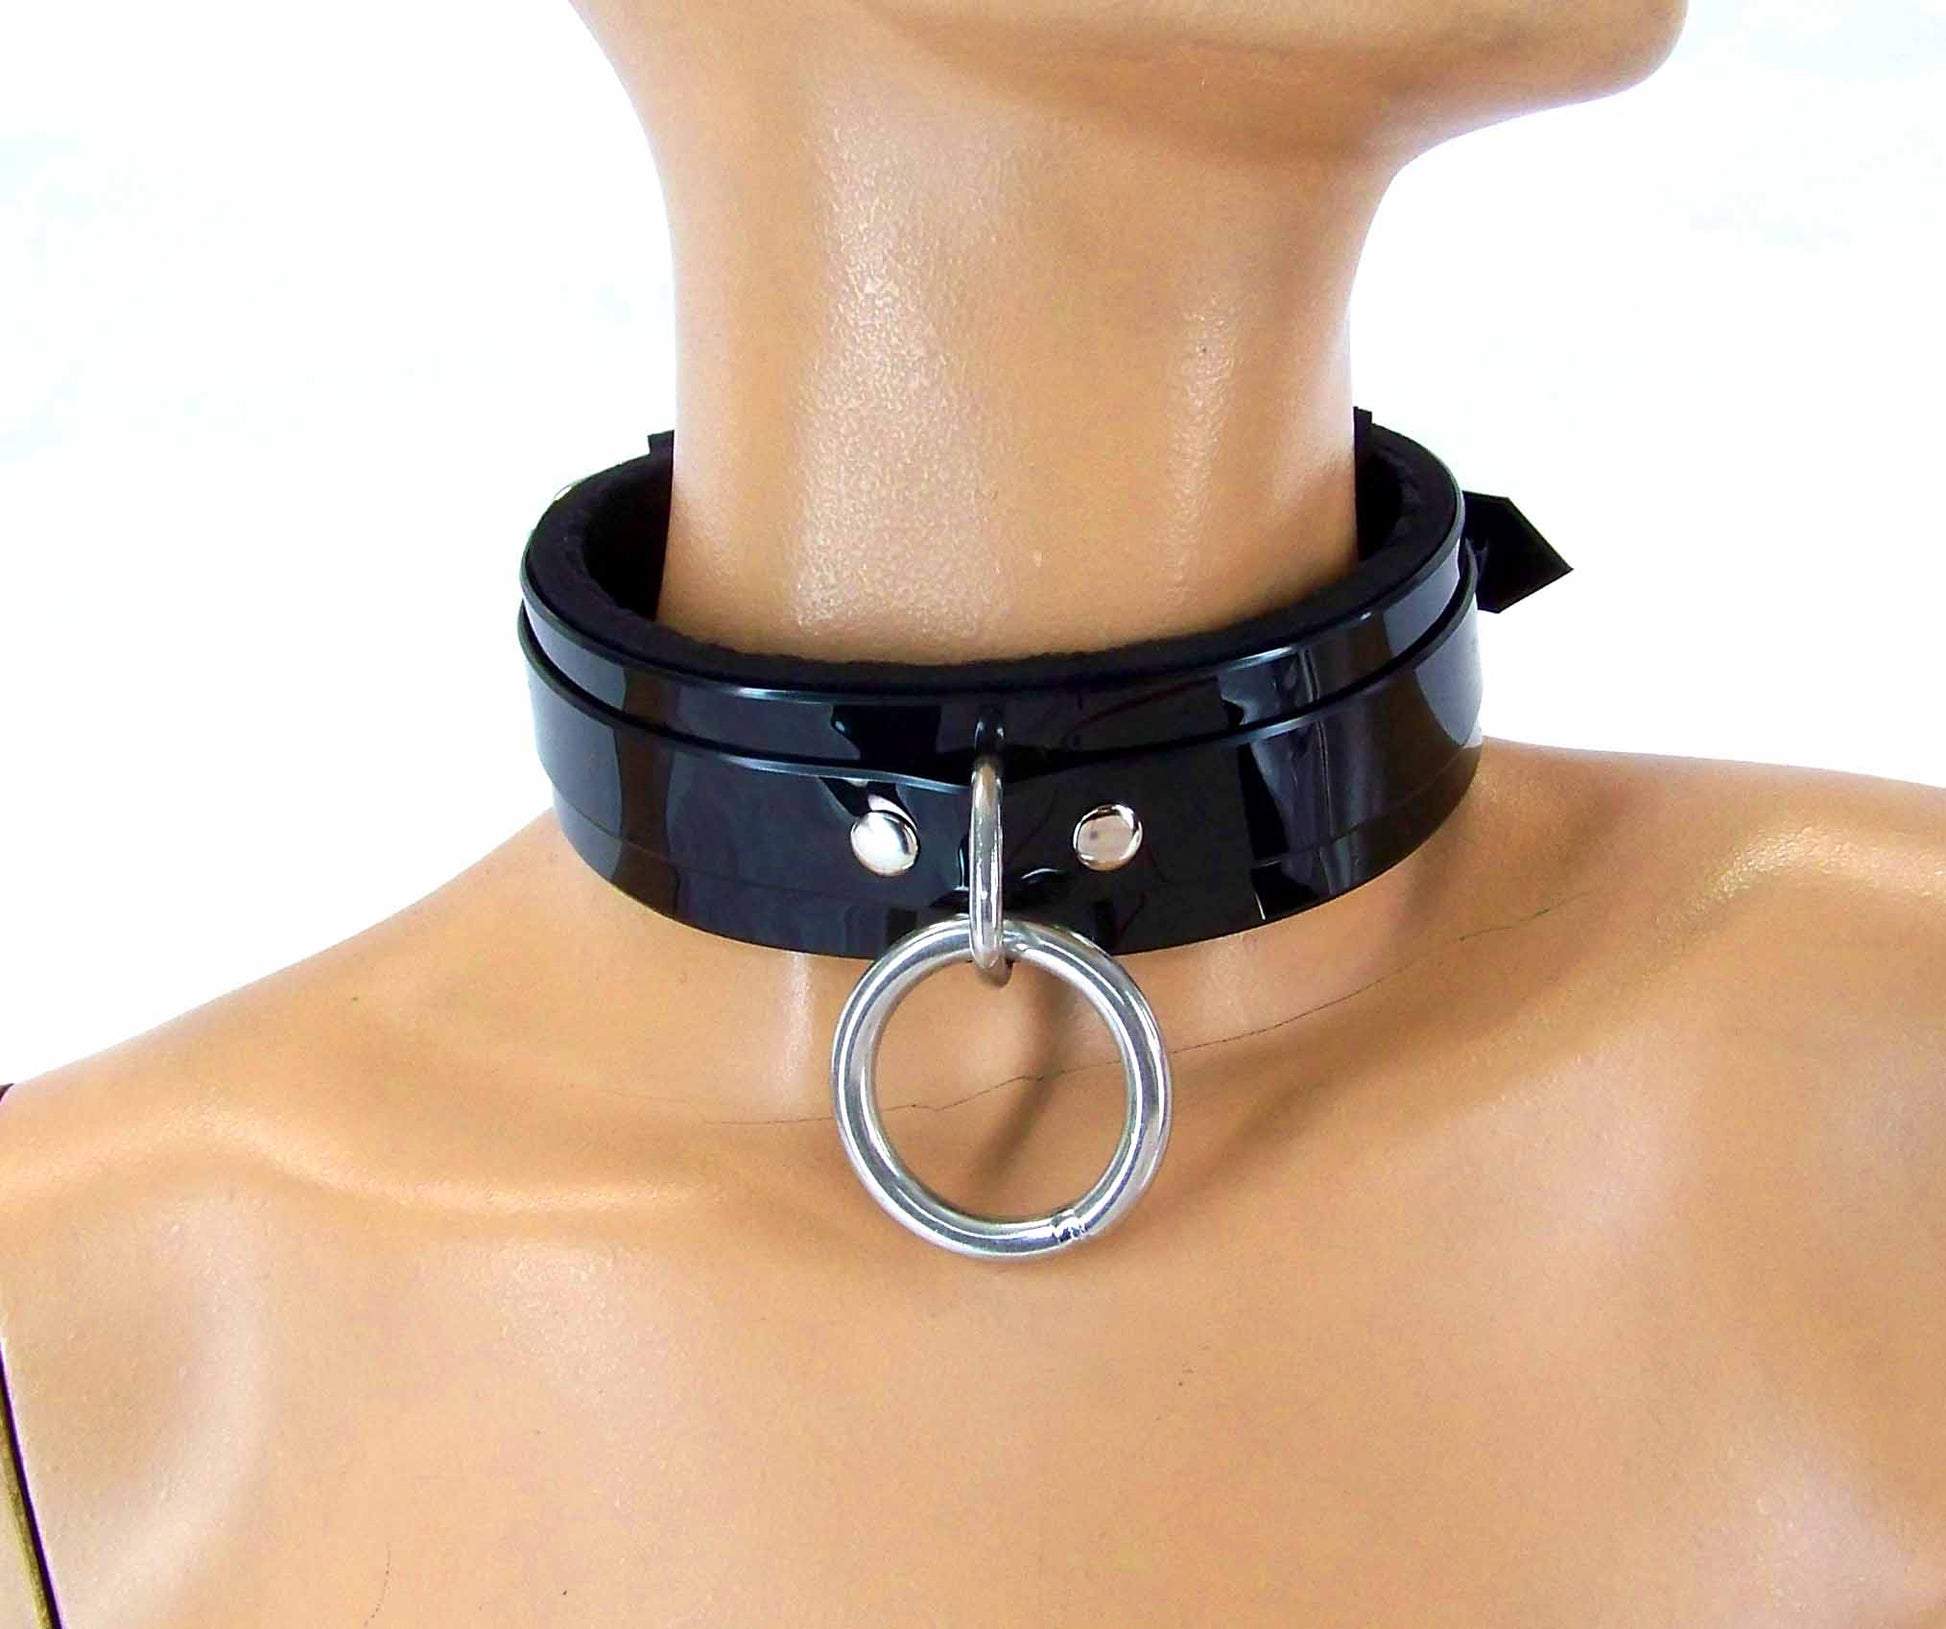 The front view of the PVC Neoprene-lined collar.